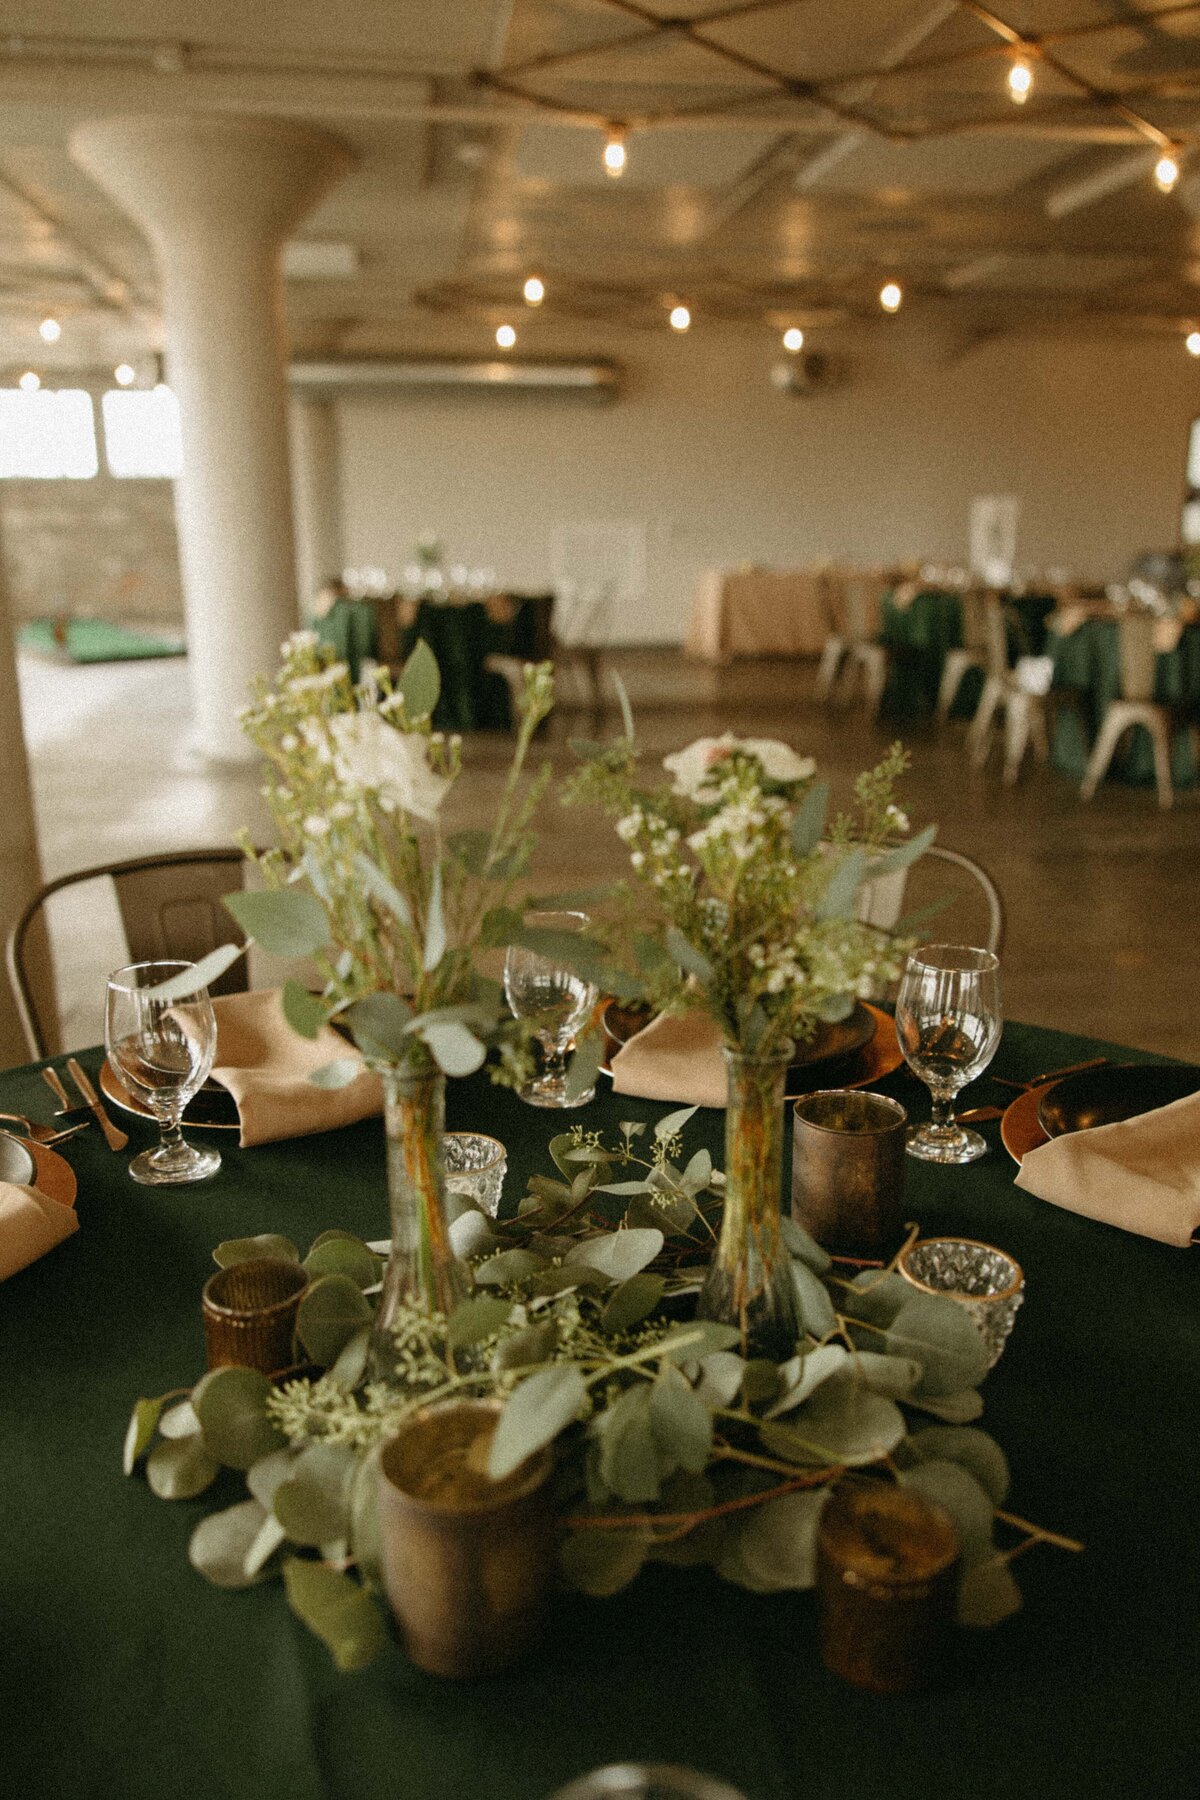 Elegant dining setup in a spacious room, ideal for Iowa weddings, featuring a table with green tablecloth, floral centerpieces, and crystal glassware.